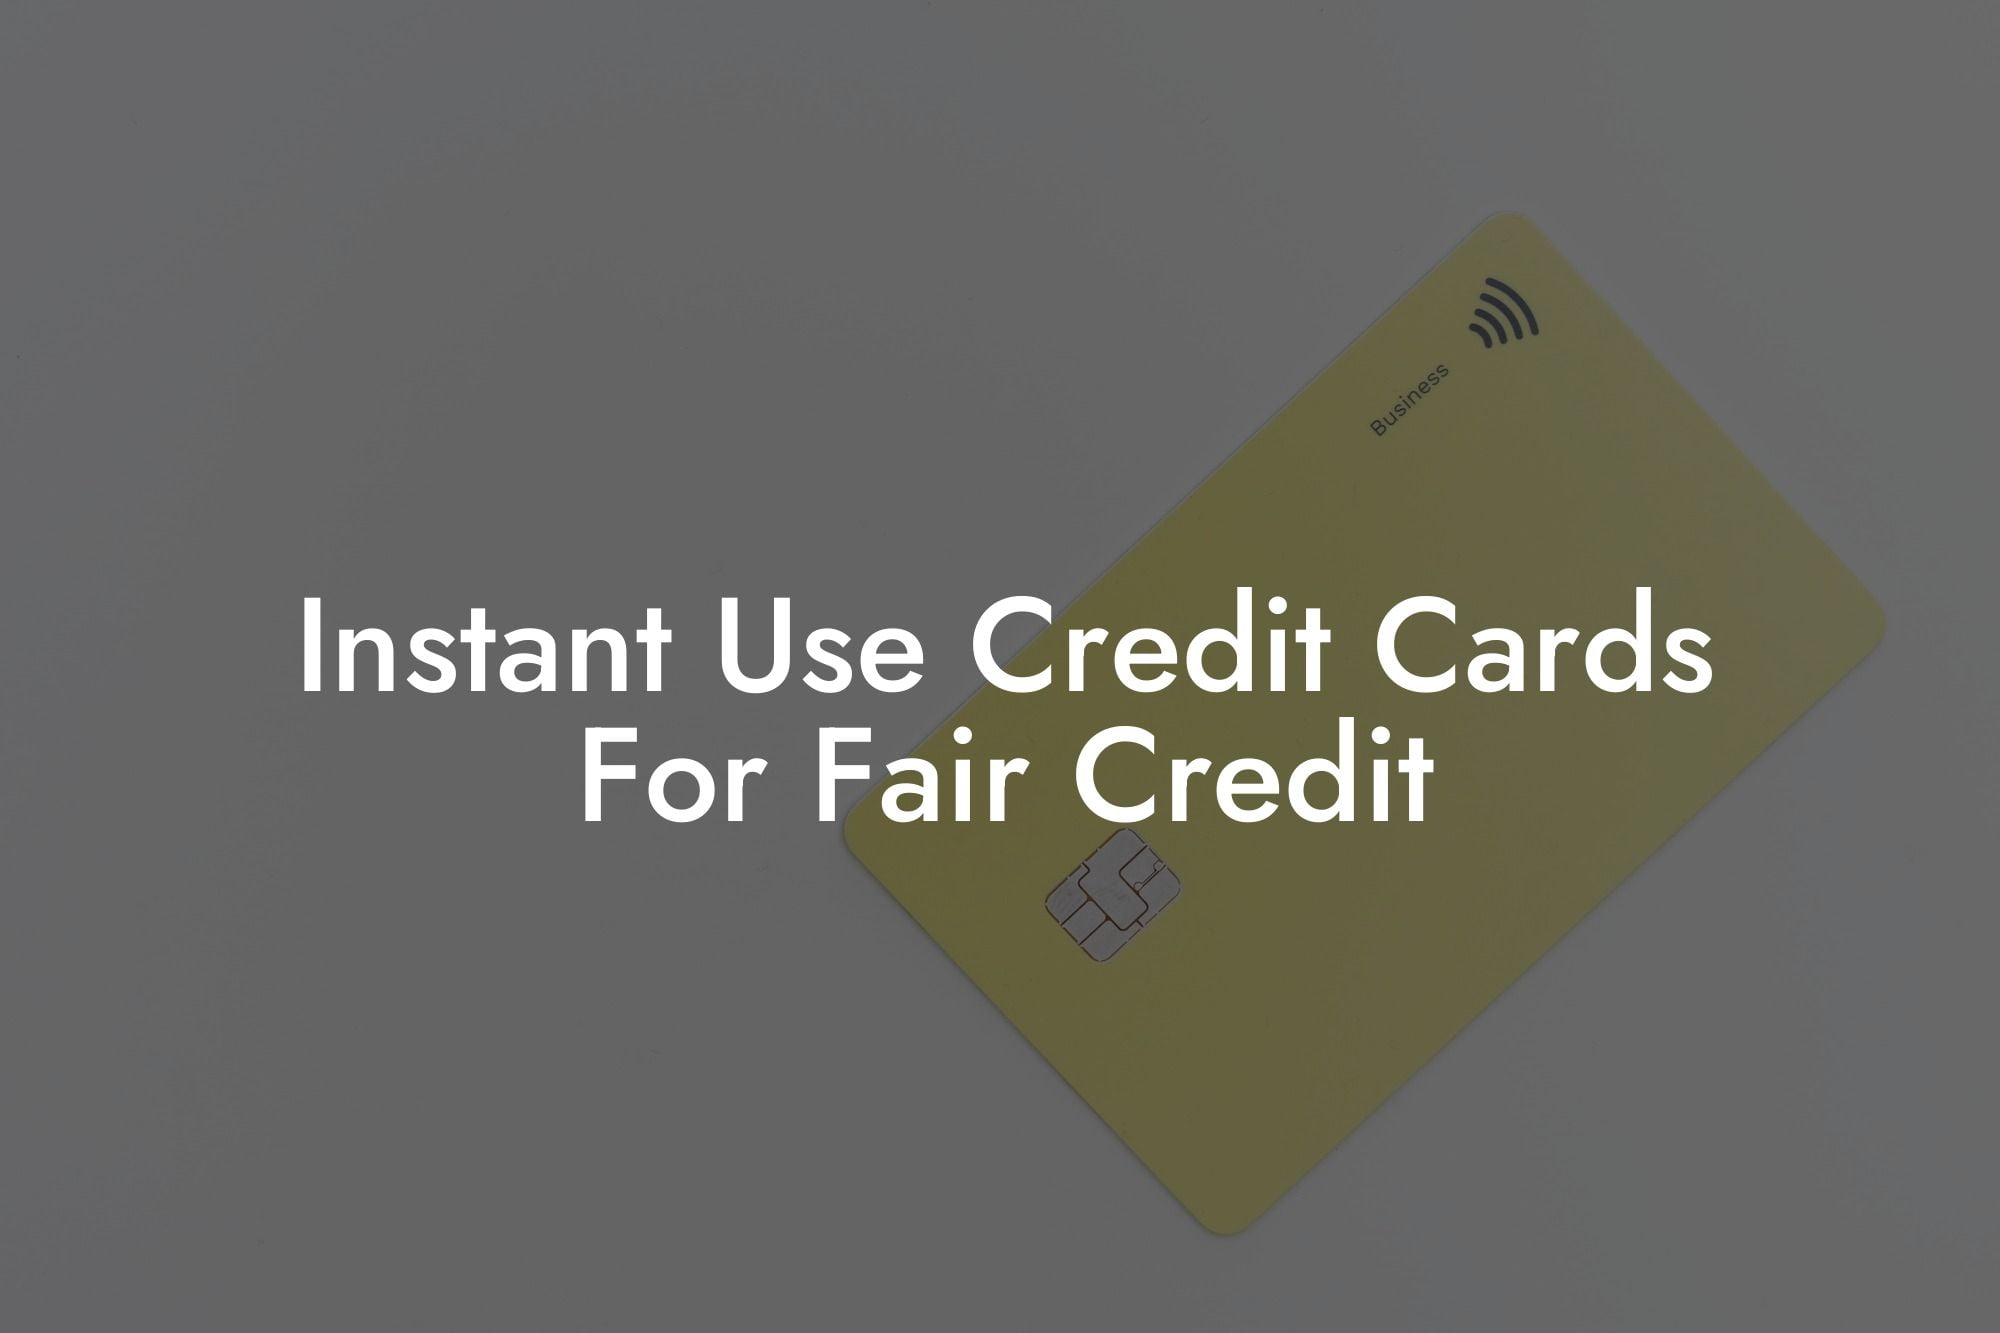 Instant Use Credit Cards For Fair Credit